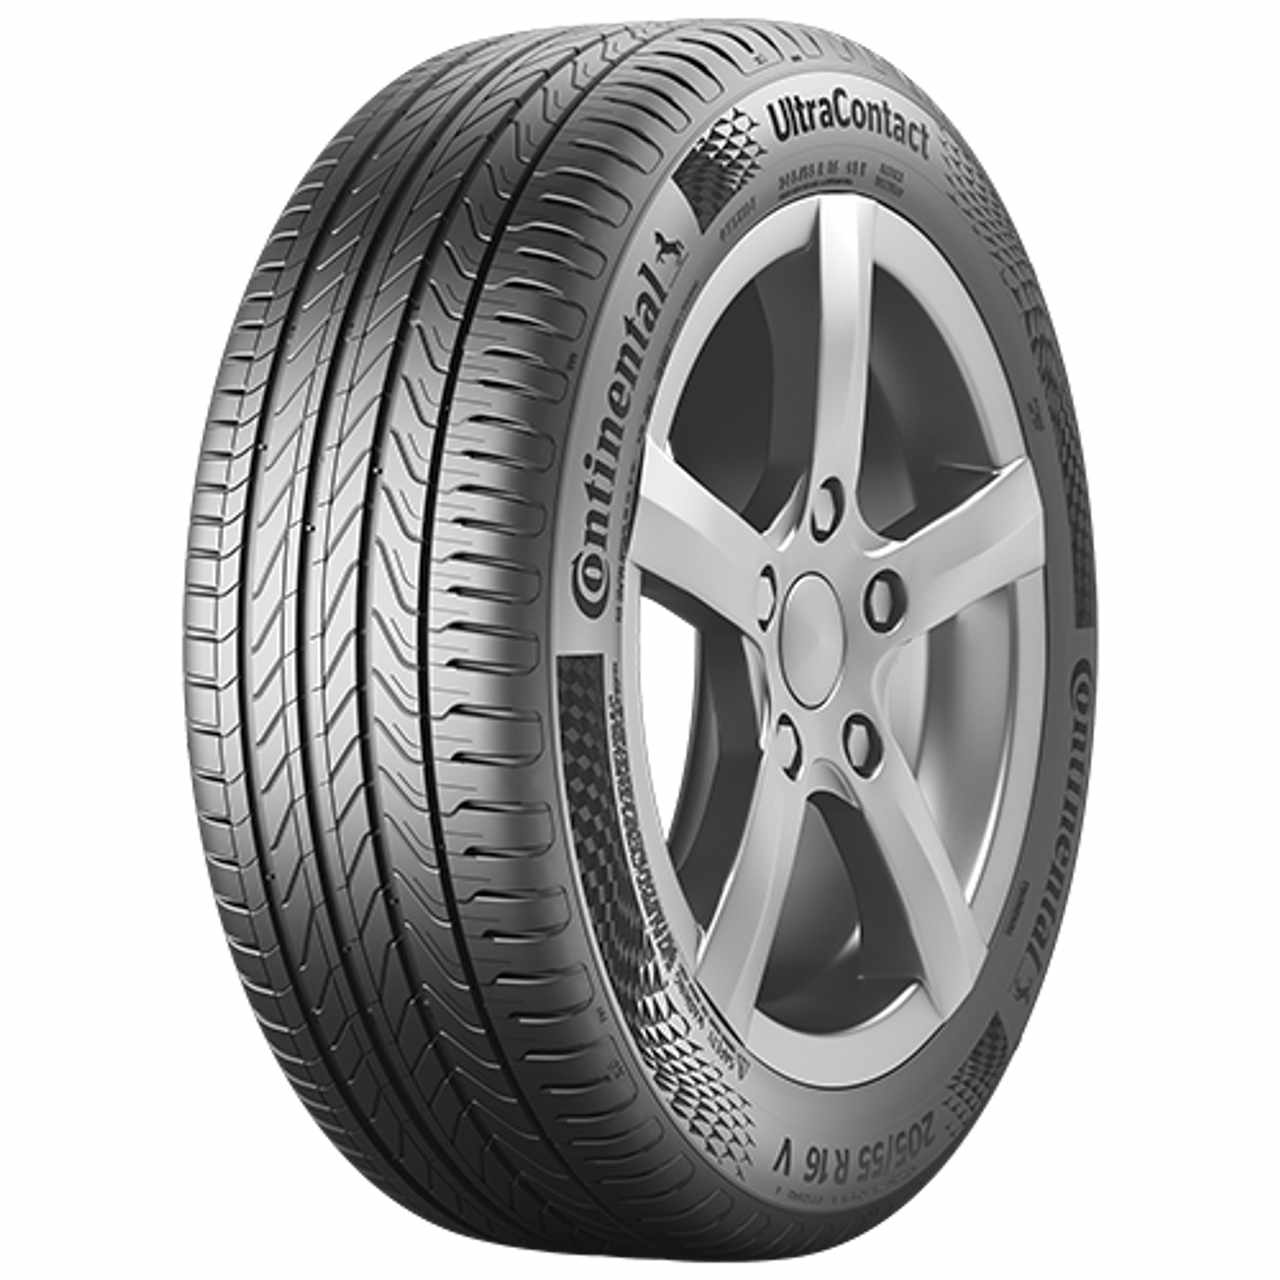 CONTINENTAL ULTRACONTACT (EVc) 245/45R18 100W FR BSW XL